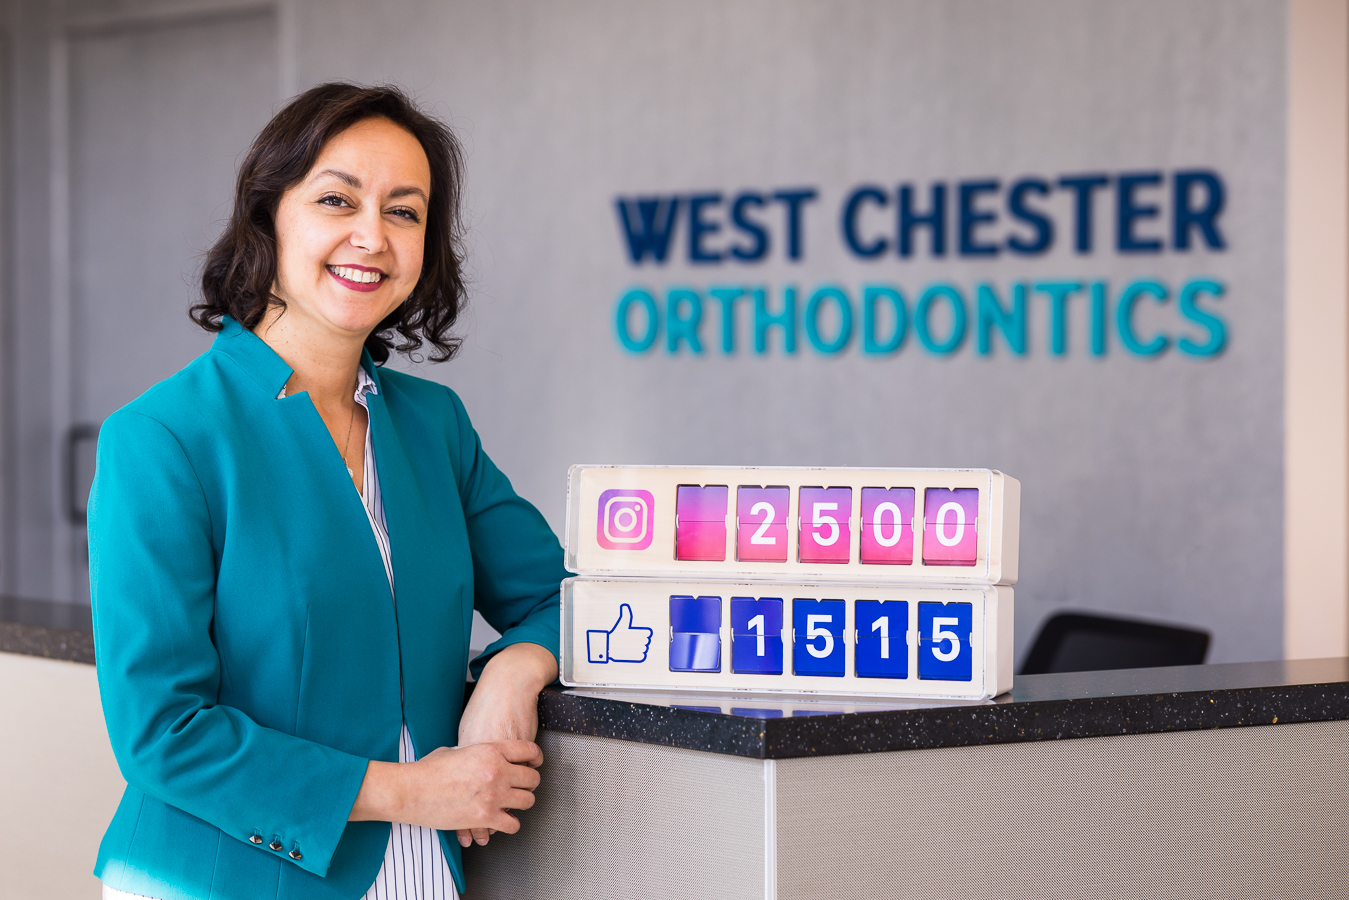 image of dr ferrell from west chester orthodontics as she leans against the receptionist counter in her vibrant teal jacket with her number count as to how many followers they have on Instagram and facebook captured by social media business photographer, lisa rhinehart